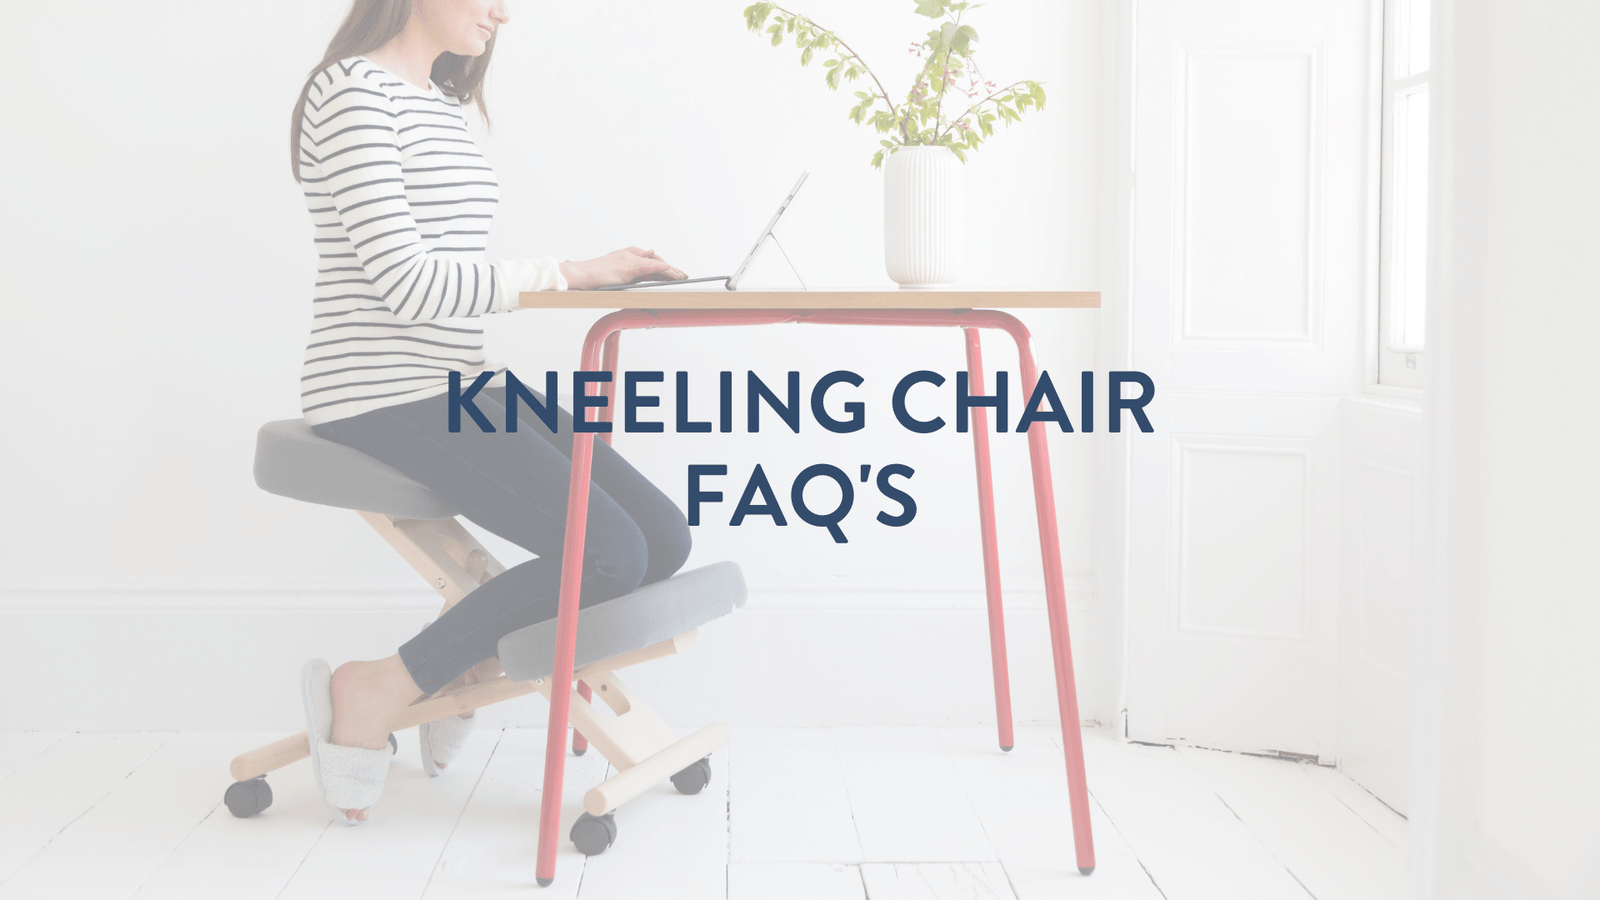 Kneeling chair FAQ's - What are the benefits & how do you use one?